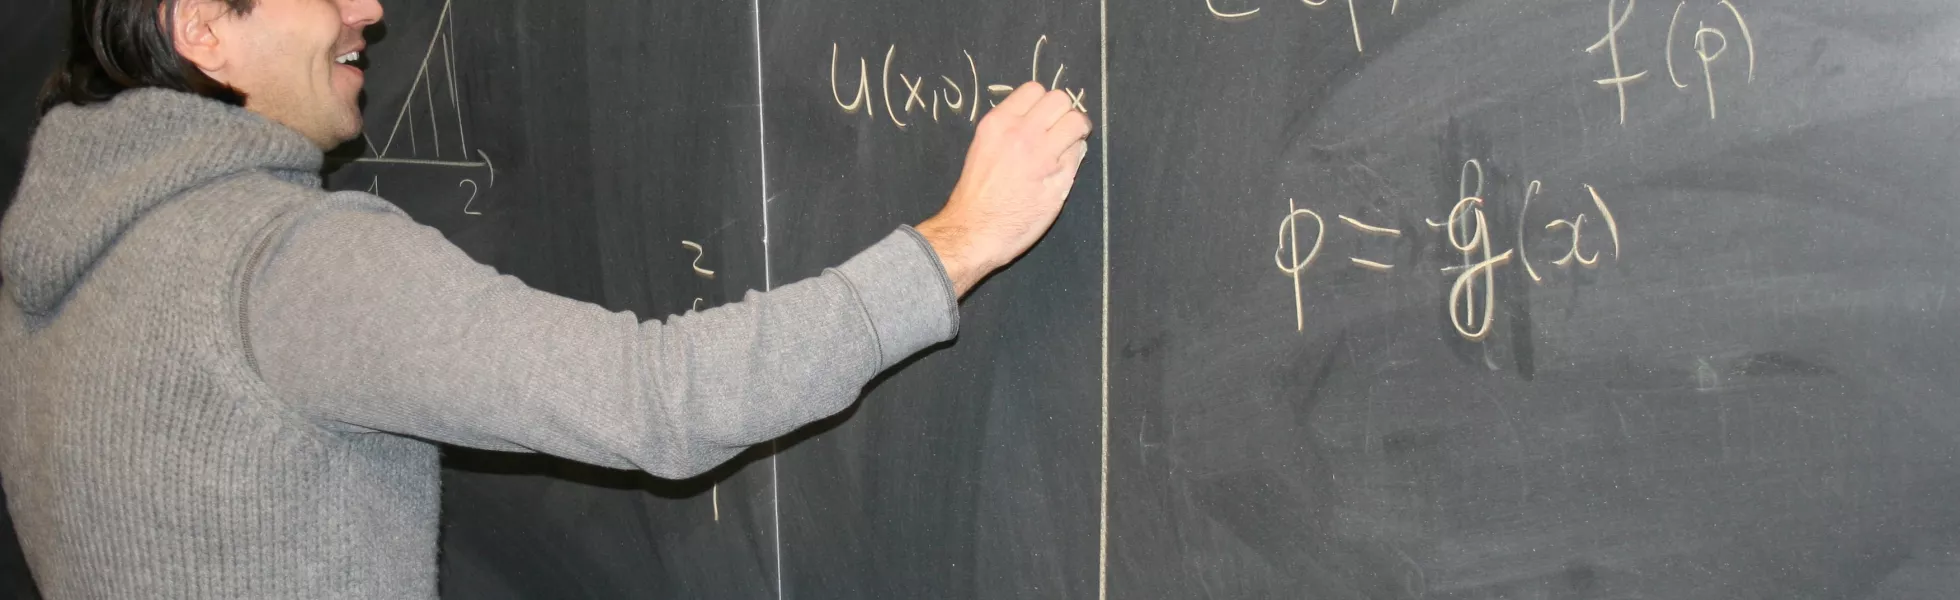 A student writing statistic equations on a blackboard with chalk.